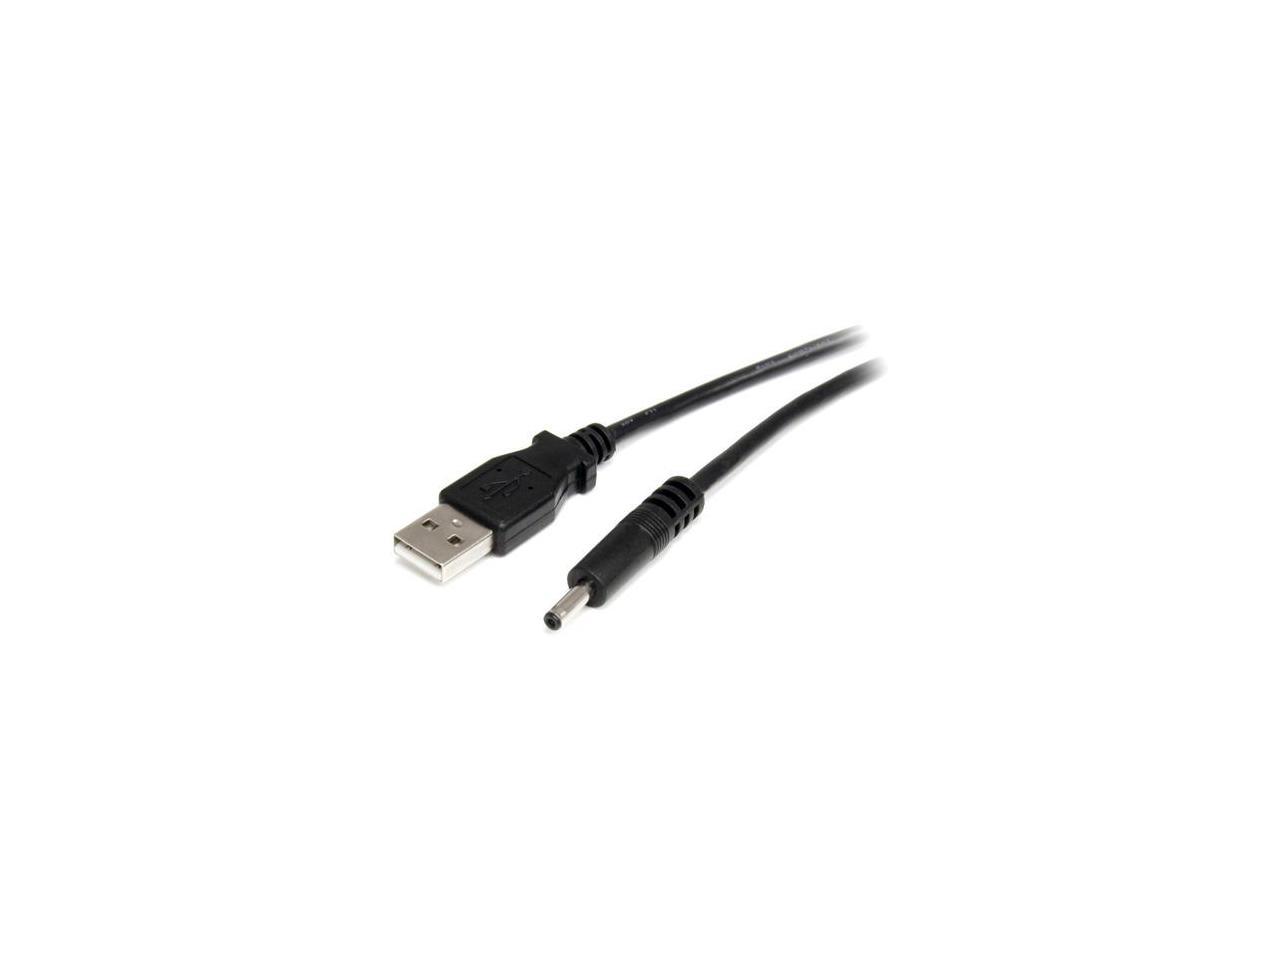 StarTech.com USB2TYPEH2M Black USB to 3.4mm power cable - Type H barrel - 2m - image 2 of 2